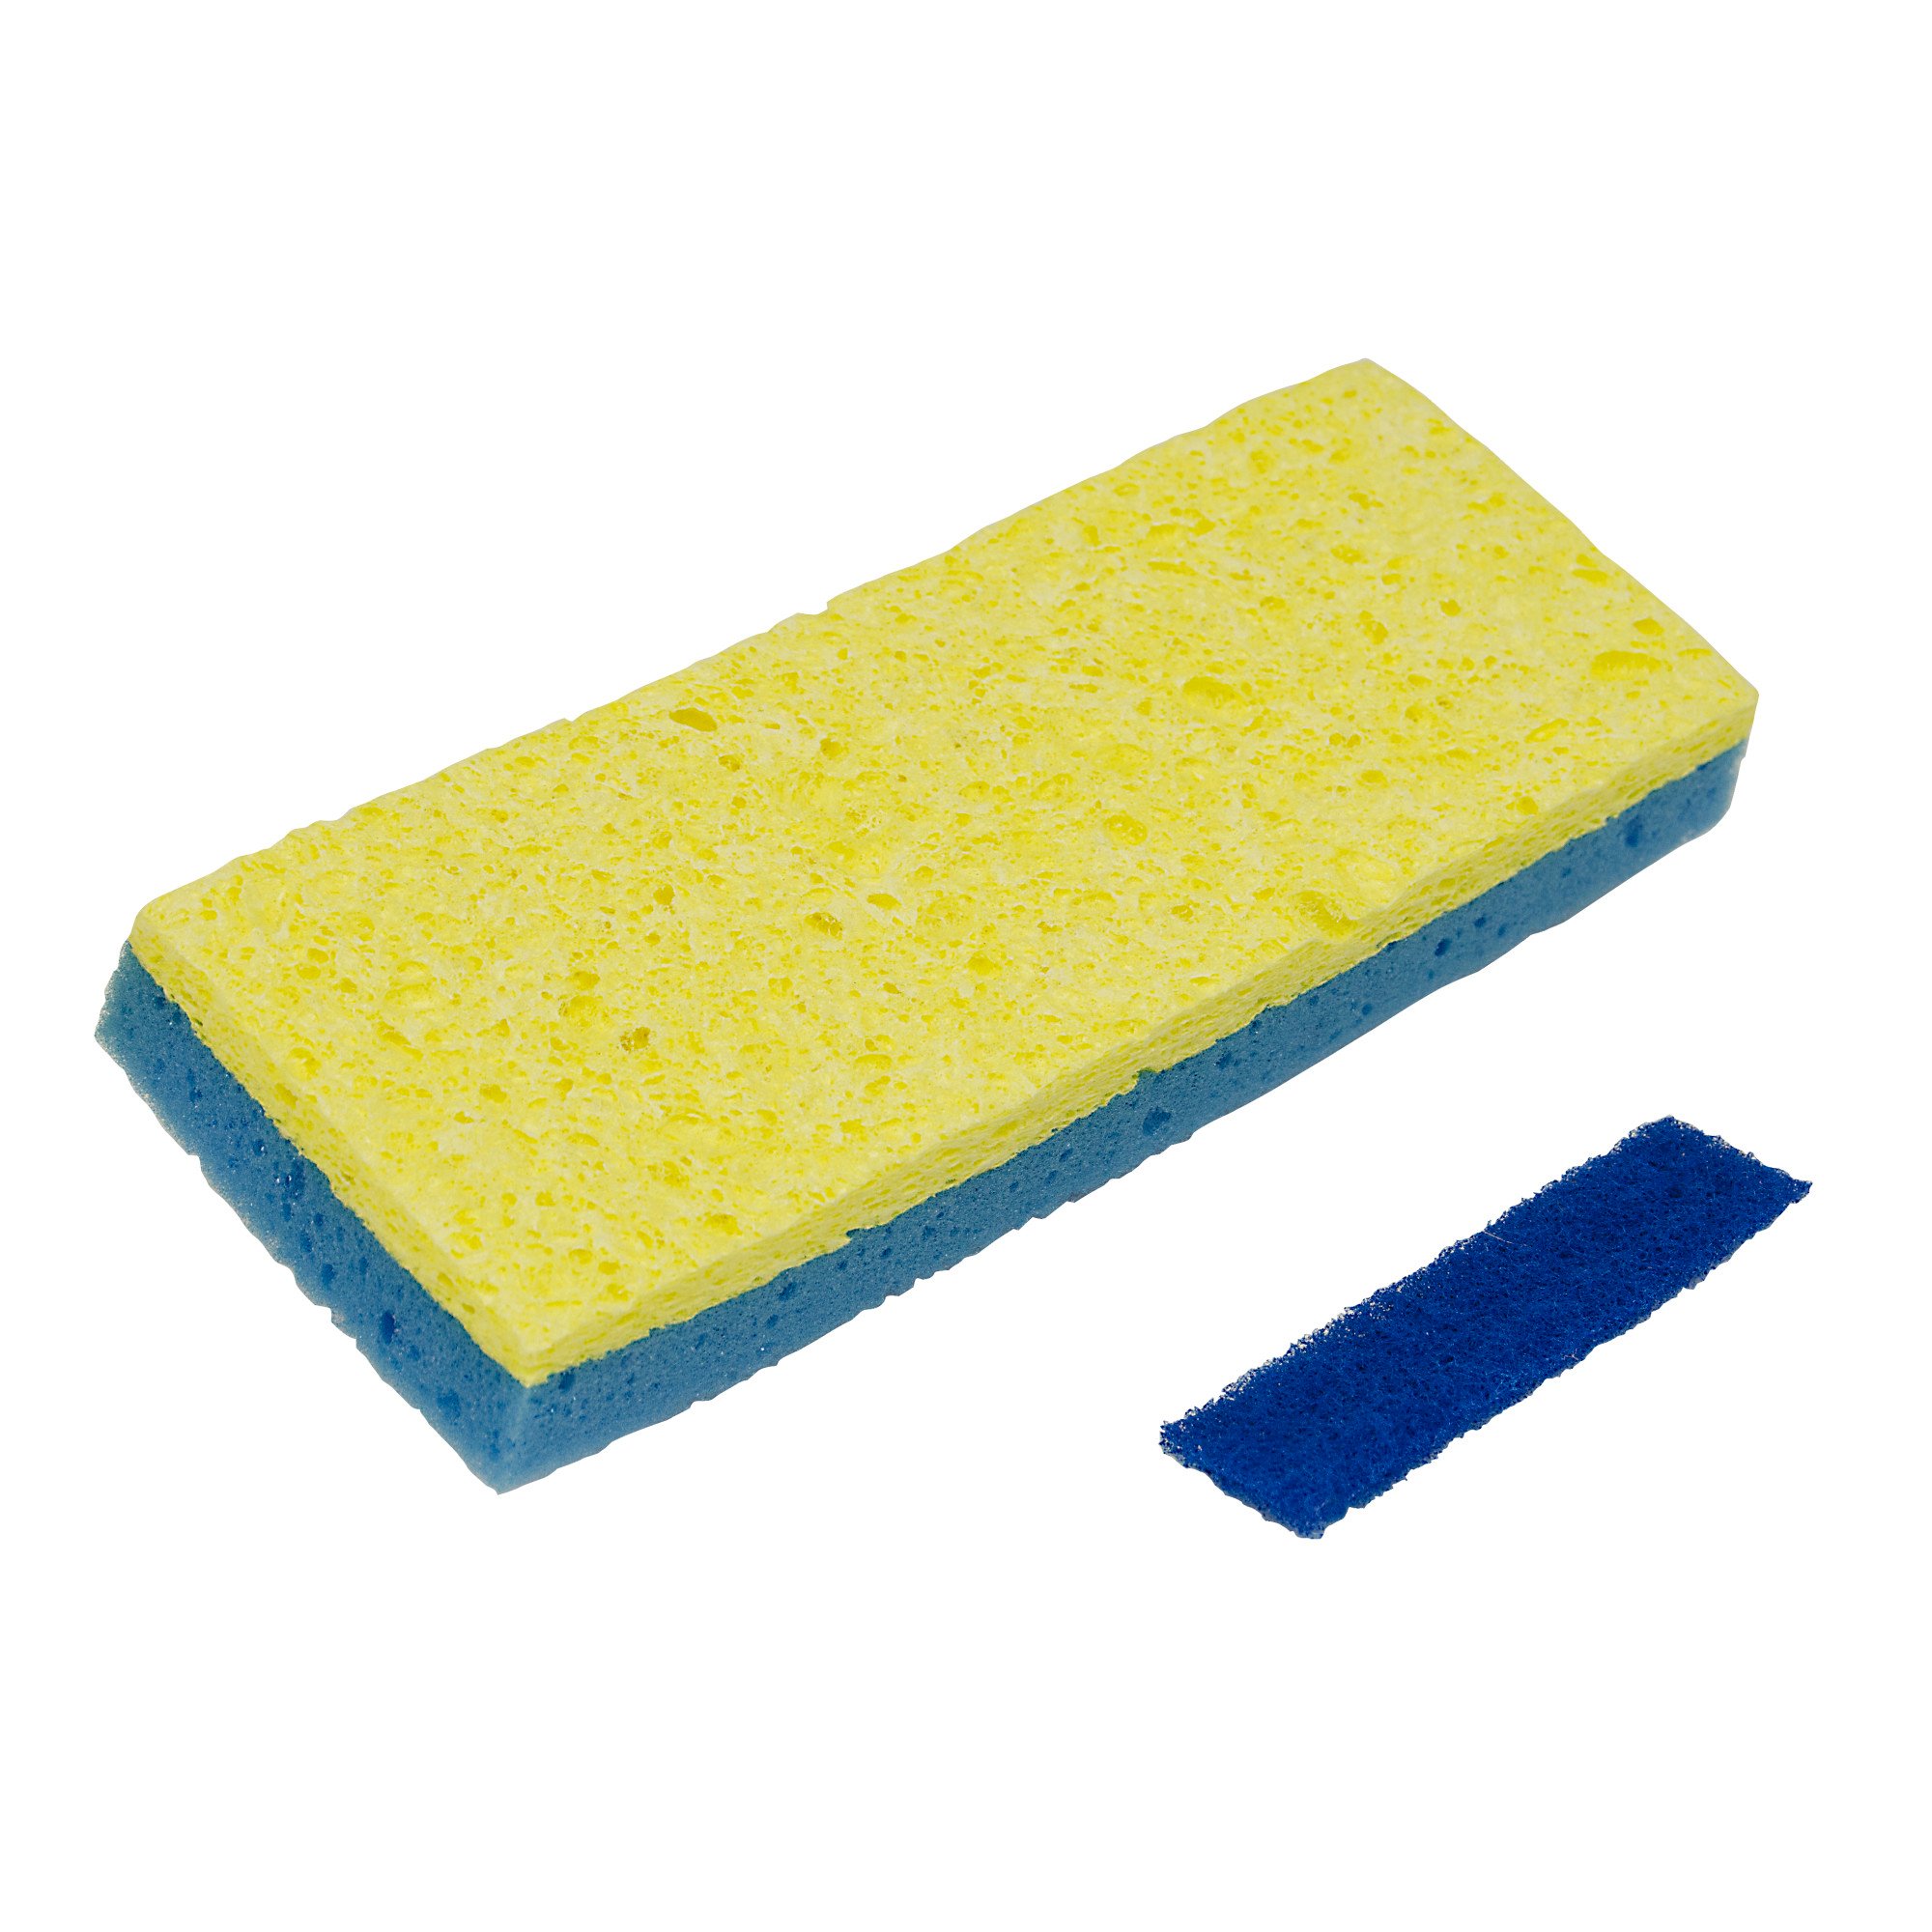 BUTLER CELLULOSE DISH WAND, Cleaning Tools & Sponges